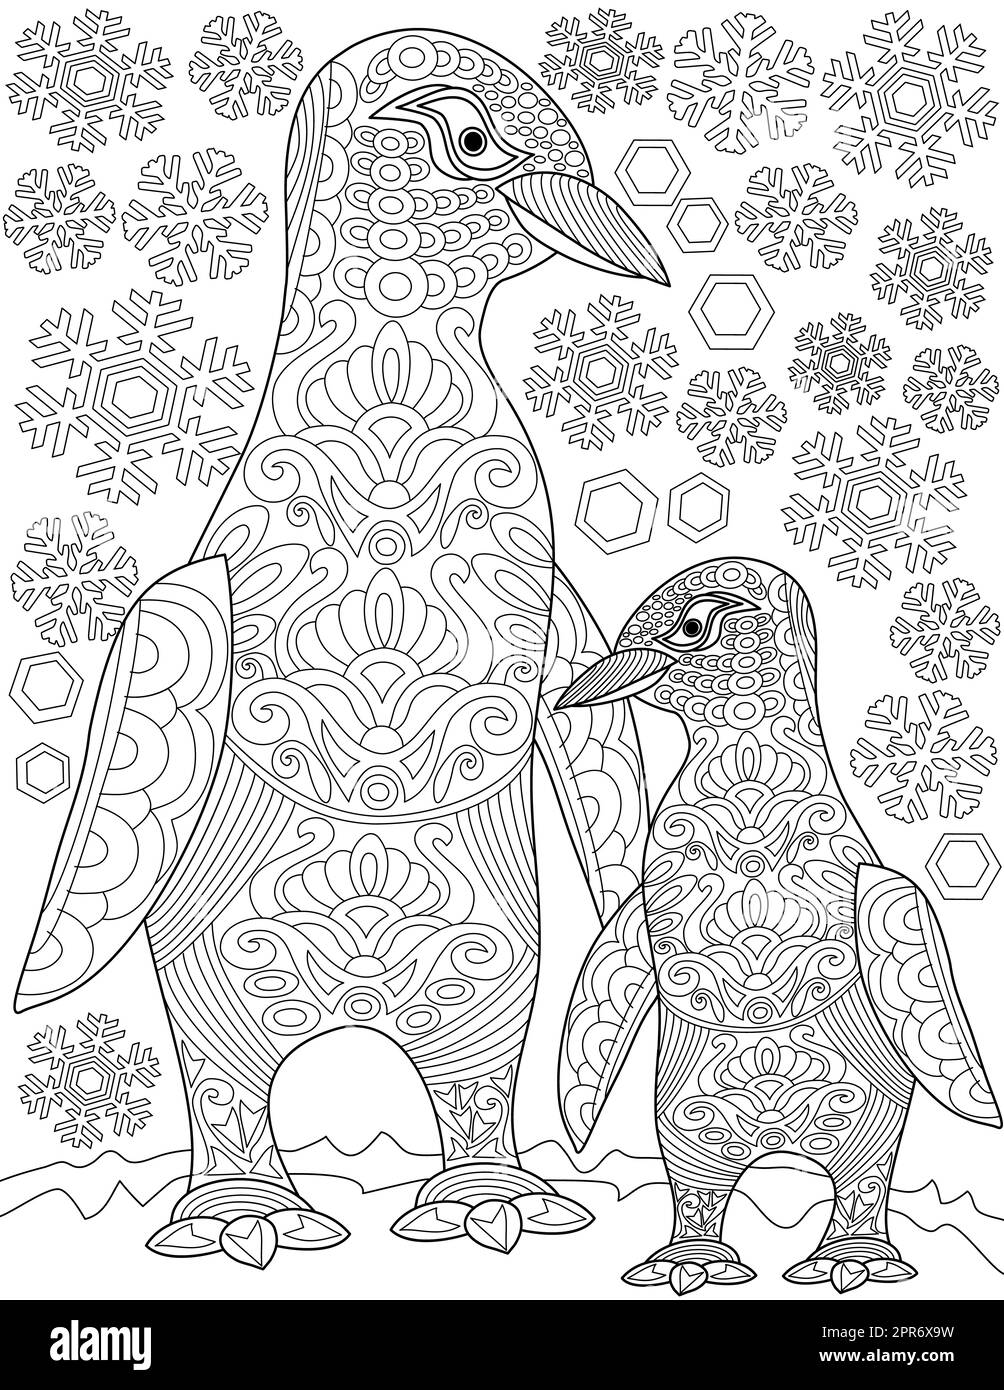 Coloring Book Page With Walking Mother And Kid Penguin With Snowflakes In Background. Sheet To Be Colored With Two Happy Sea Birds Next To One Another. Stock Photo